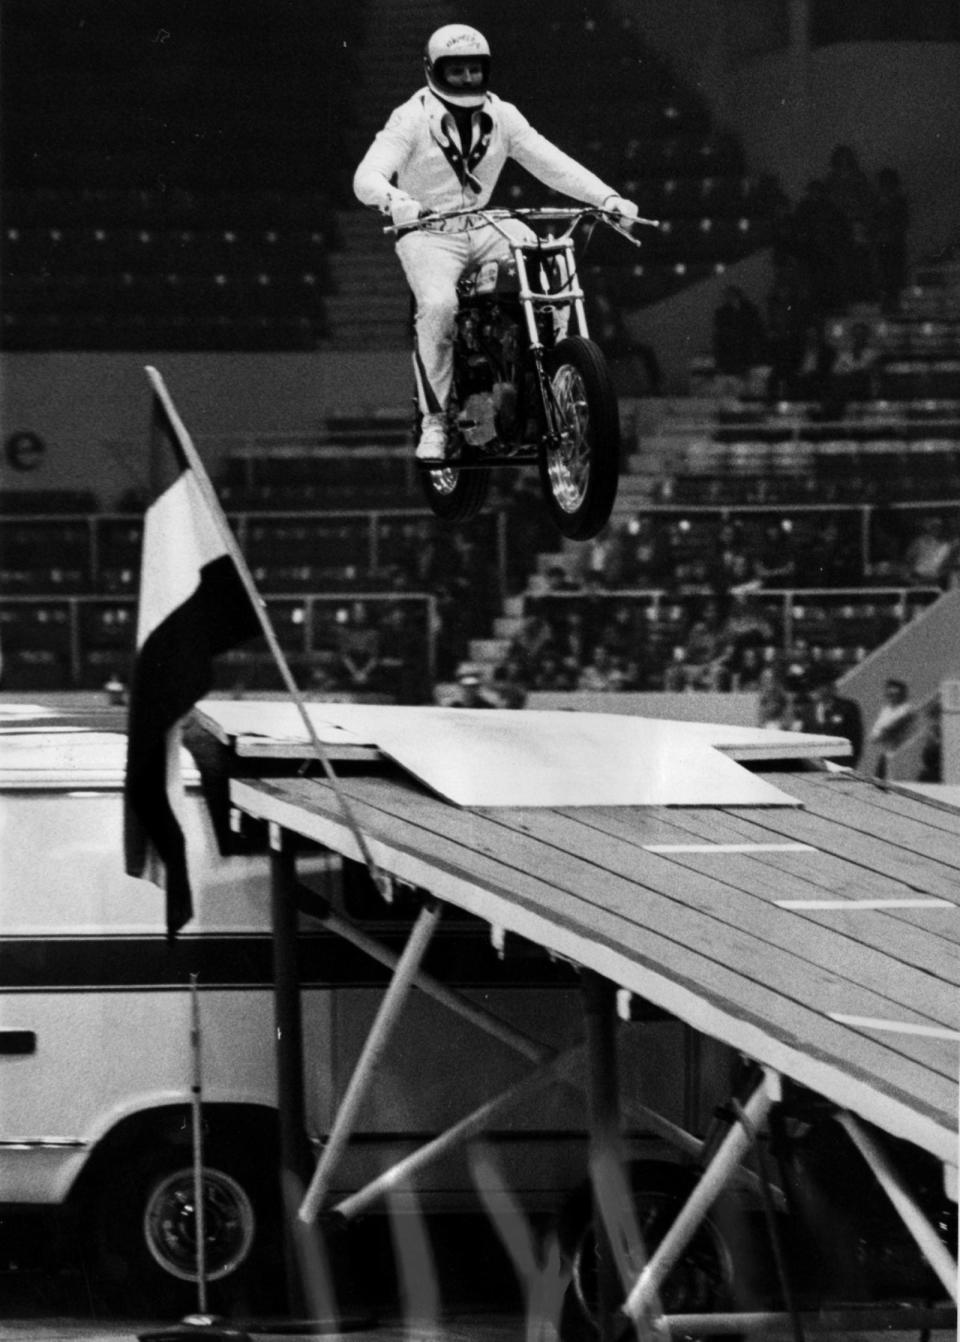 Daredevil stunt rider Evel Knievel is about to hit the landing ramp after sailing over a collection of cars and trucks during one of his performances at the Cincinnati Gardens in 1973.